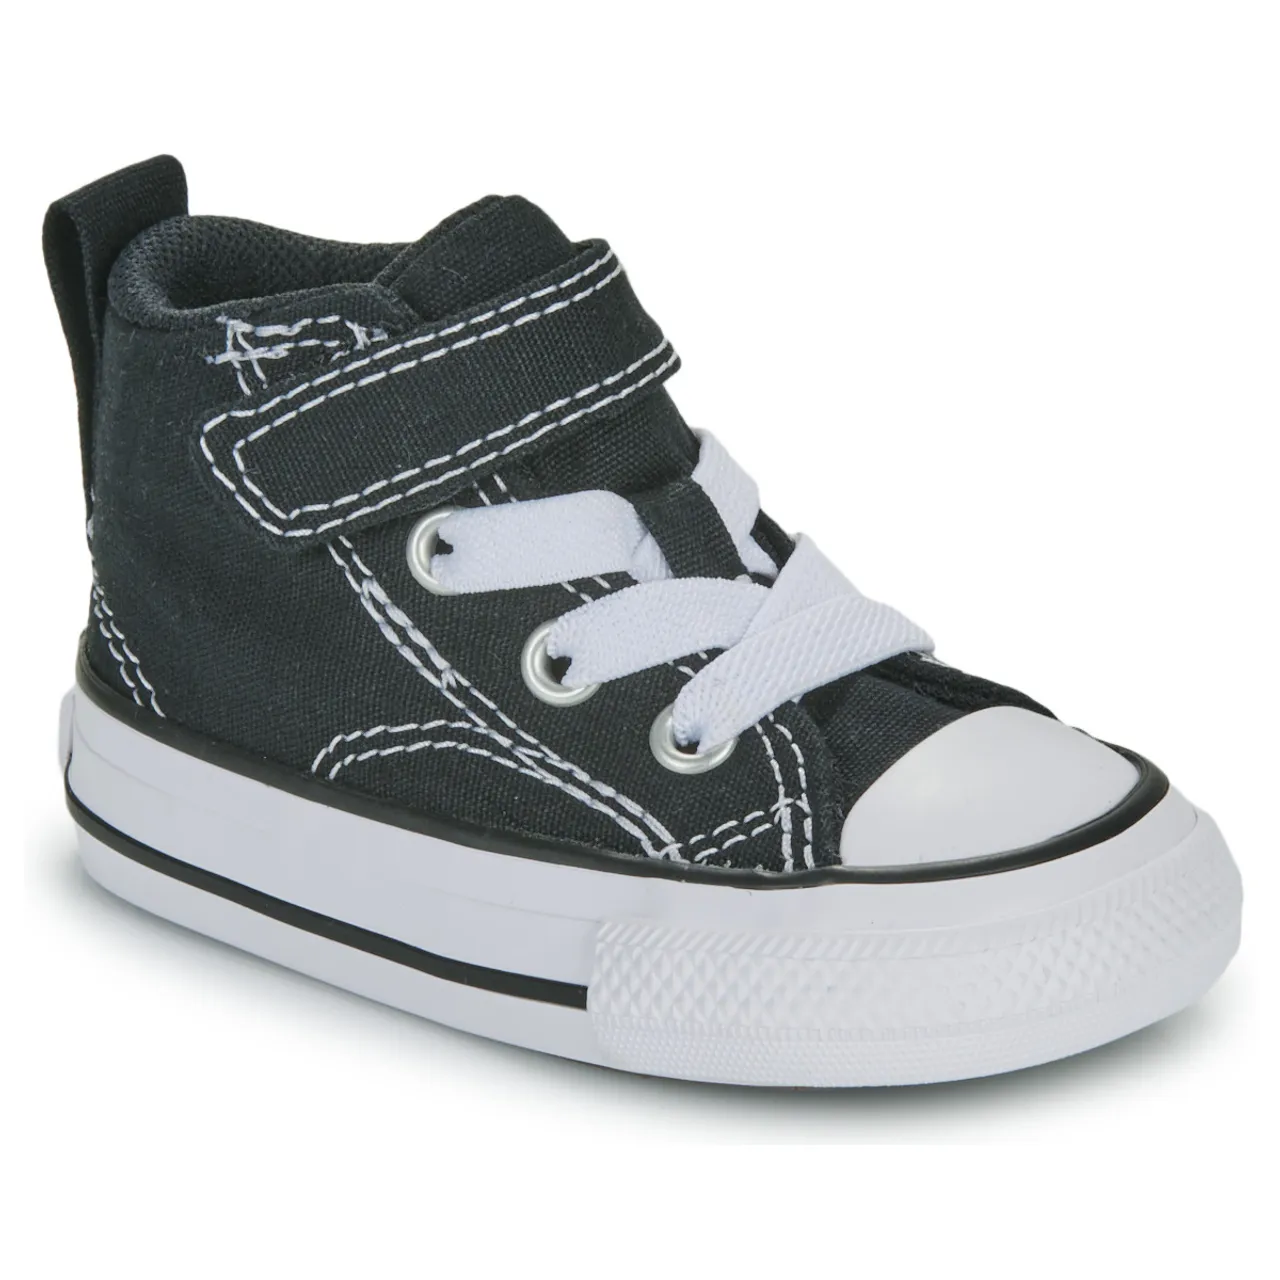 Converse  CHUCK TAYLOR ALL STAR MALDEN STREET  boys's Children's Shoes (High-top Trainers) in Black